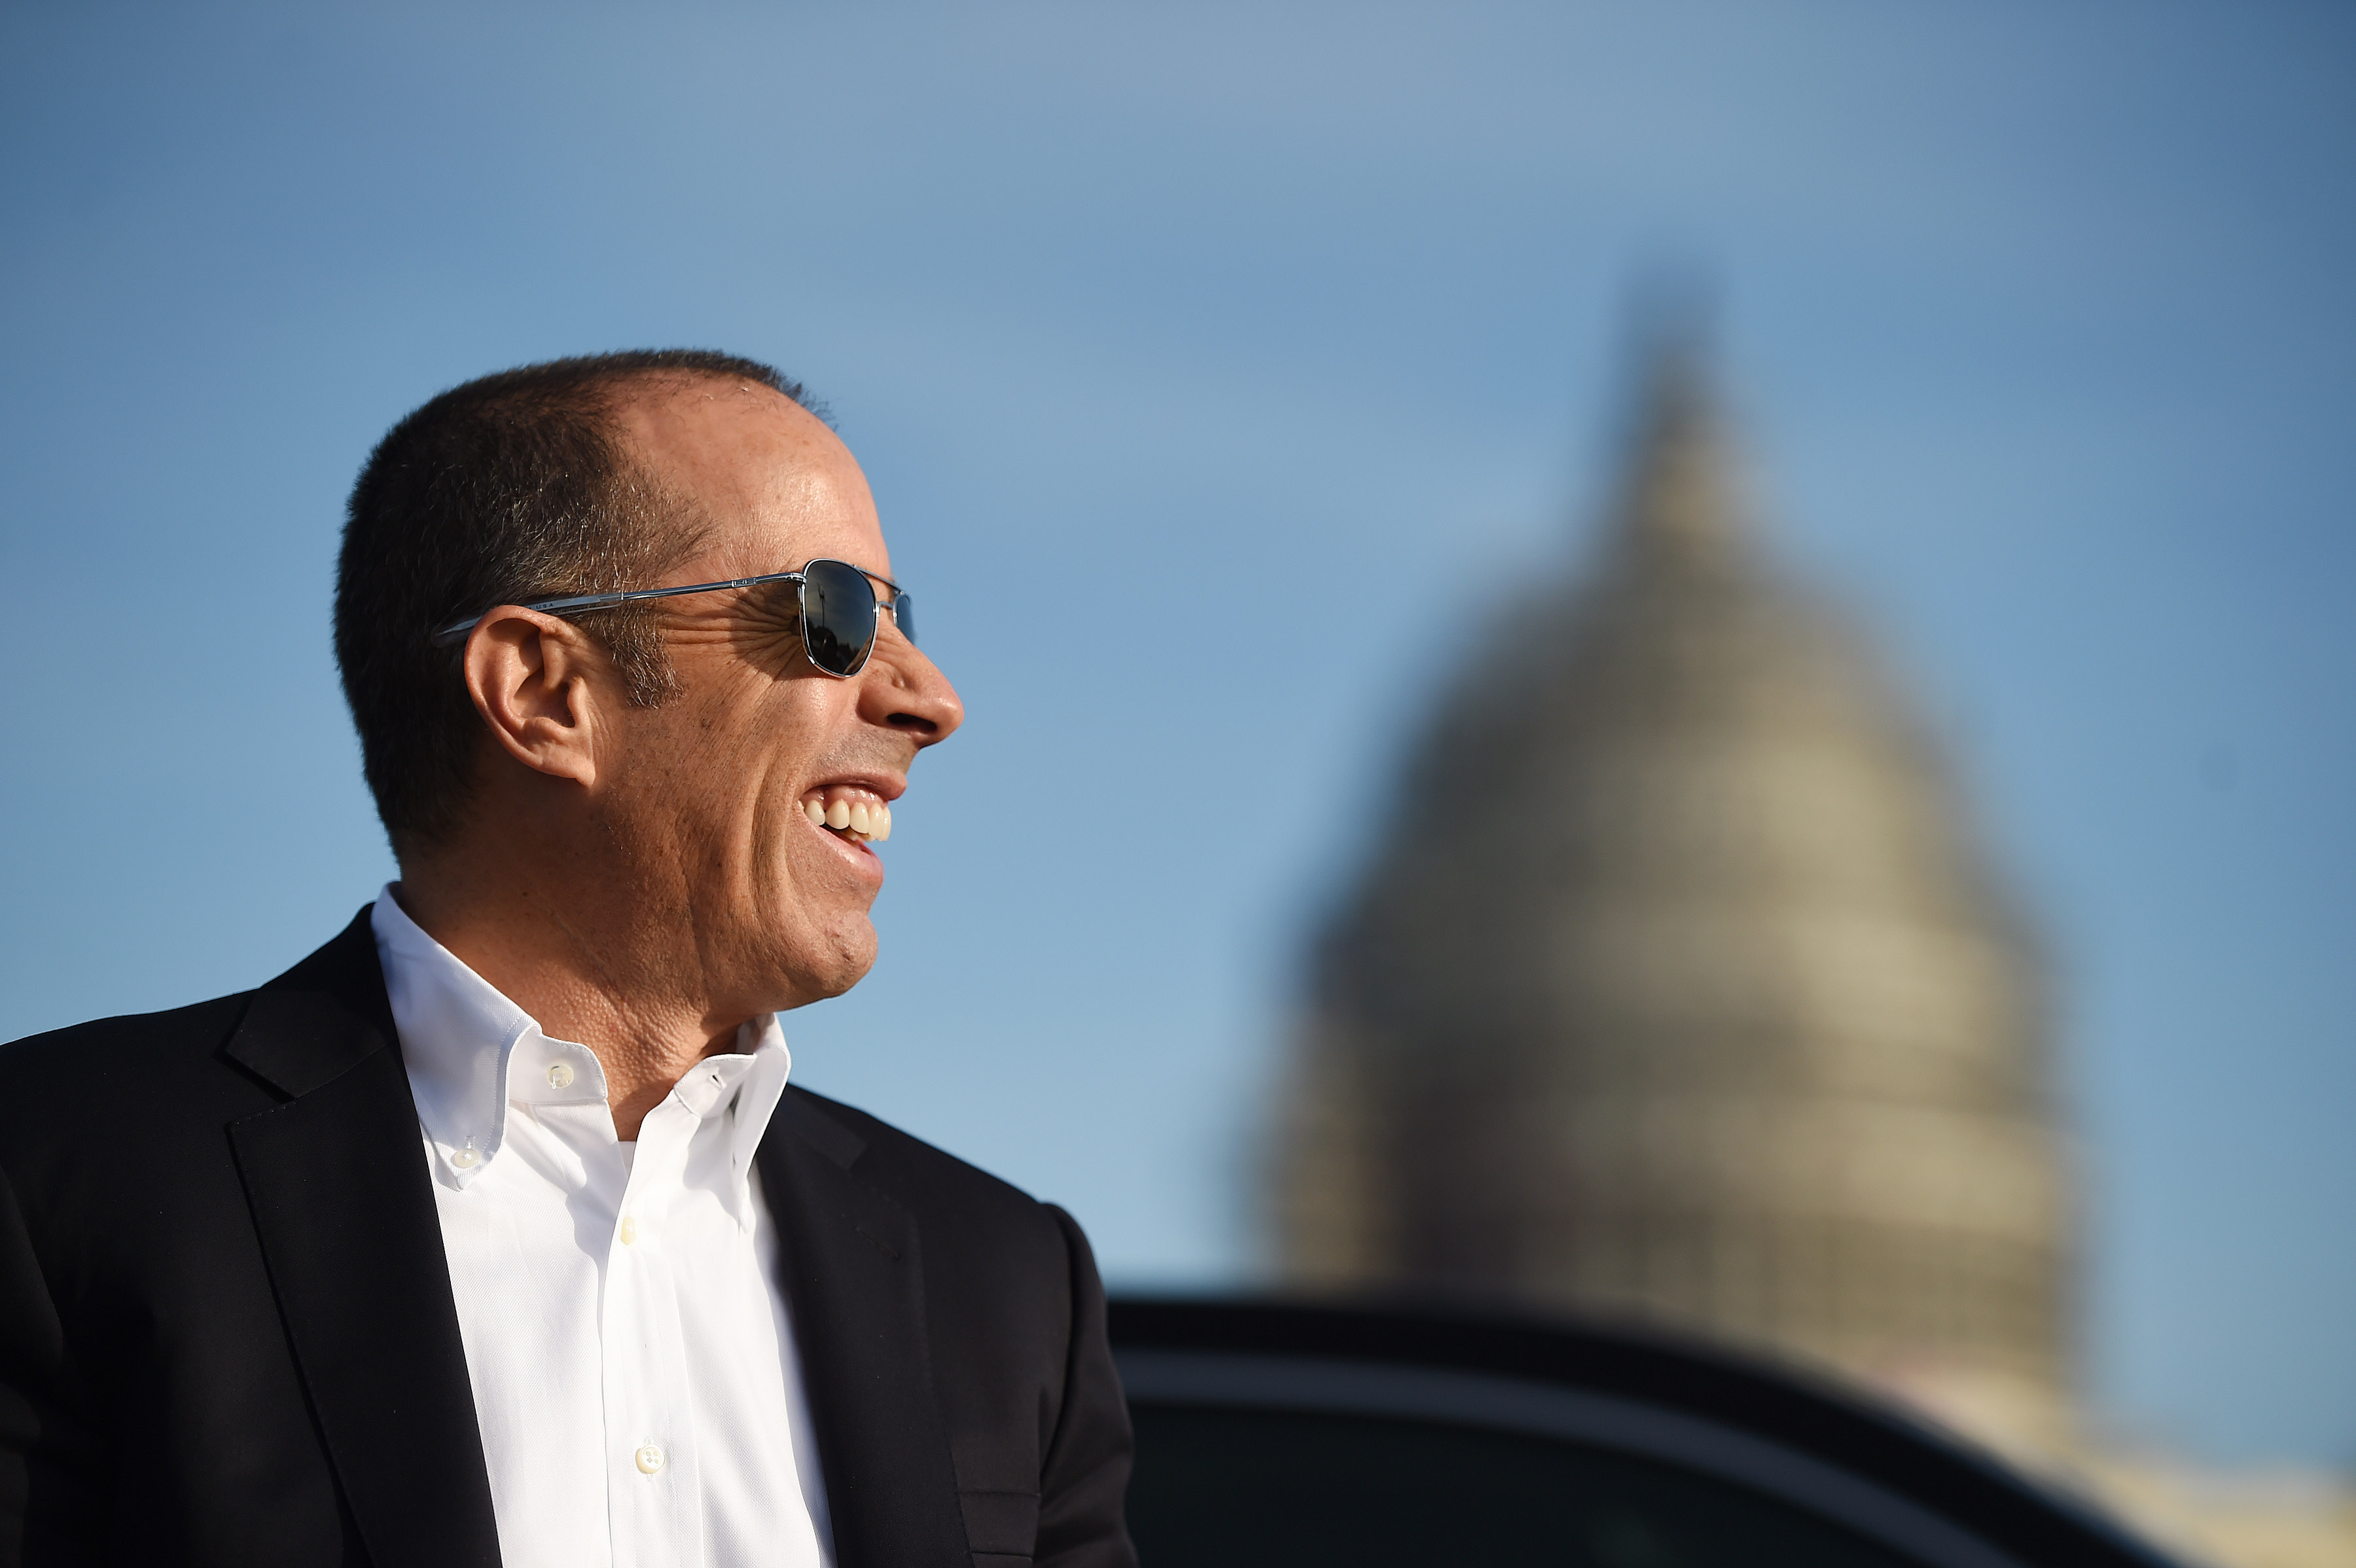 Jerry Seinfeld waits for the next scene to be filmed for an upcoming episode of the program, <i>Comedians in Cars Getting Coffee</i> on Dec. 6, 2015, in Washington, D.C. (The Washington Post—Getty Images)